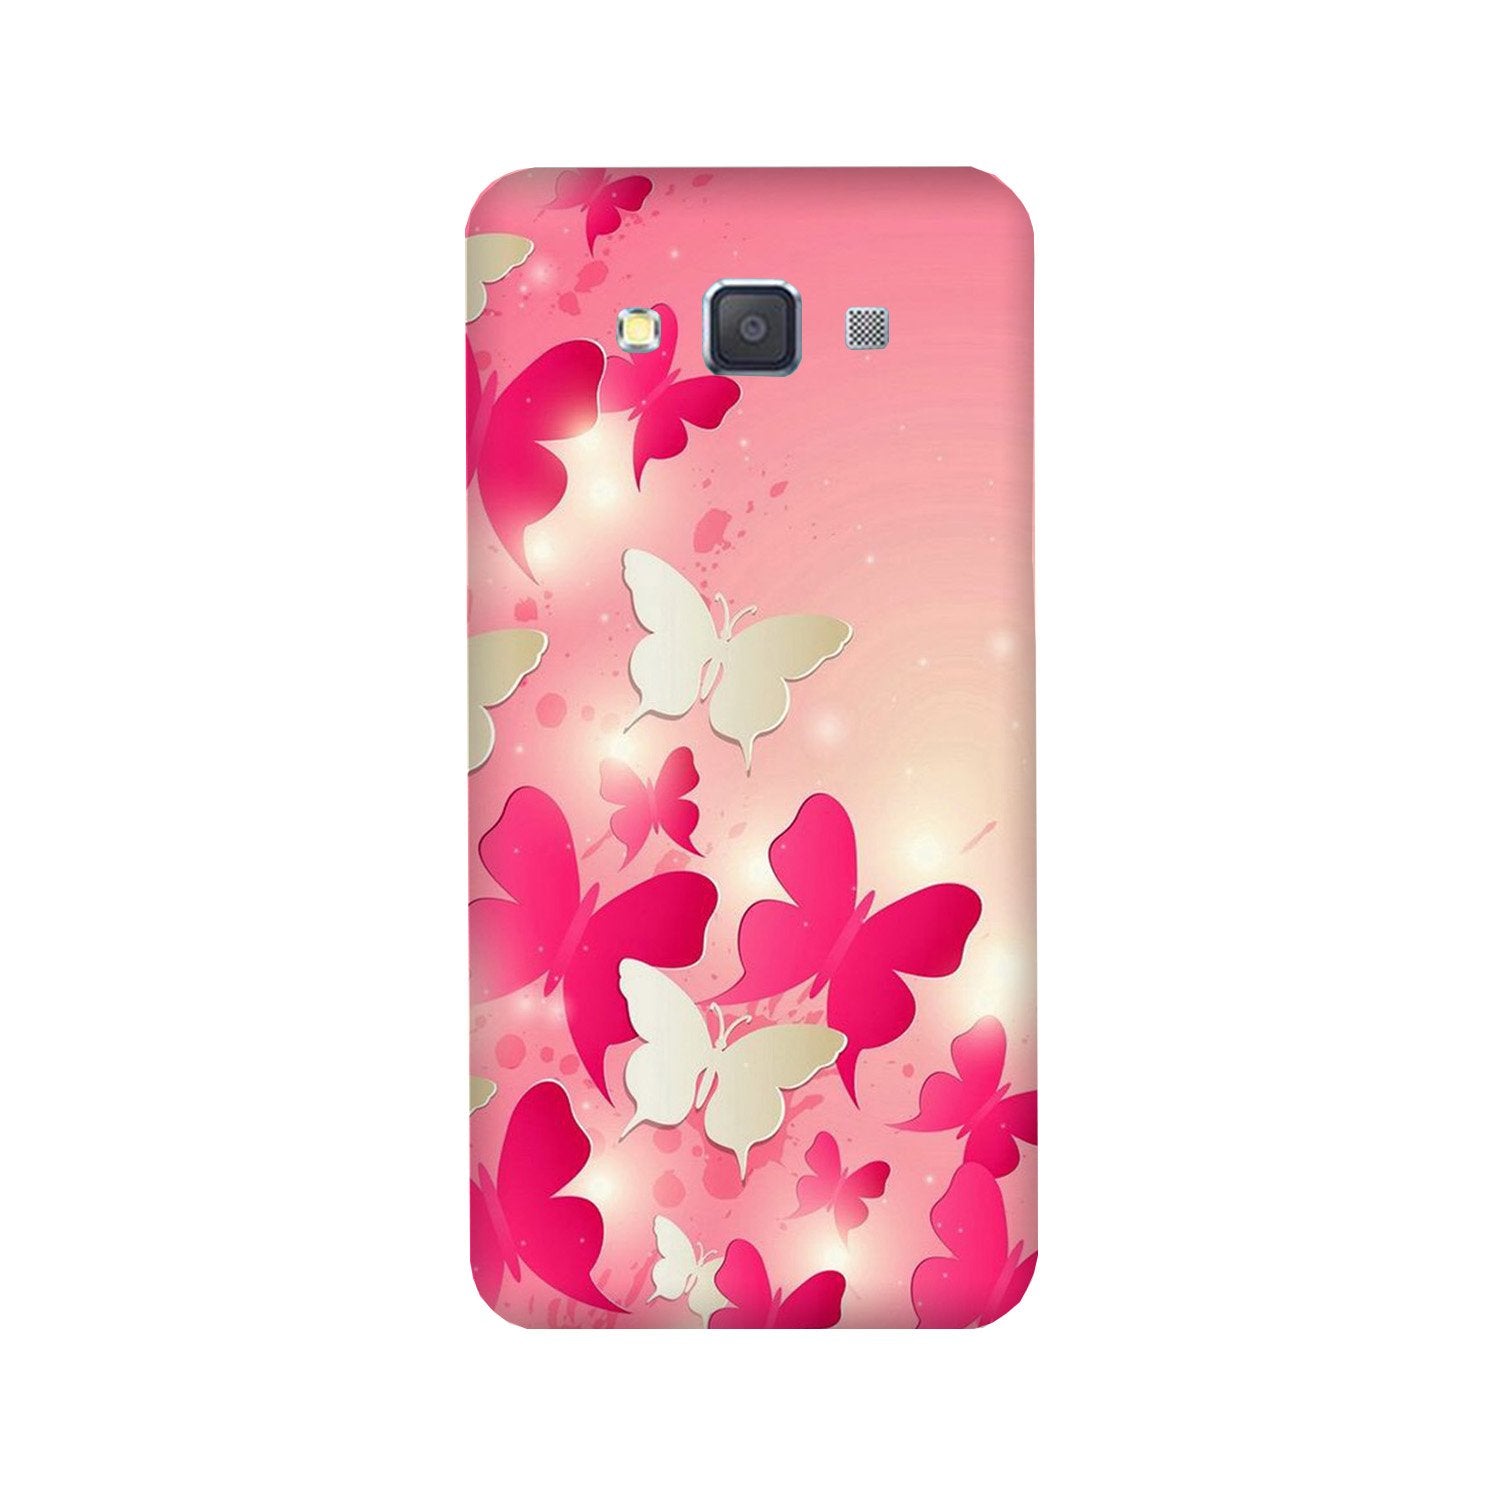 White Pick Butterflies Case for Galaxy ON7/ON7 Pro